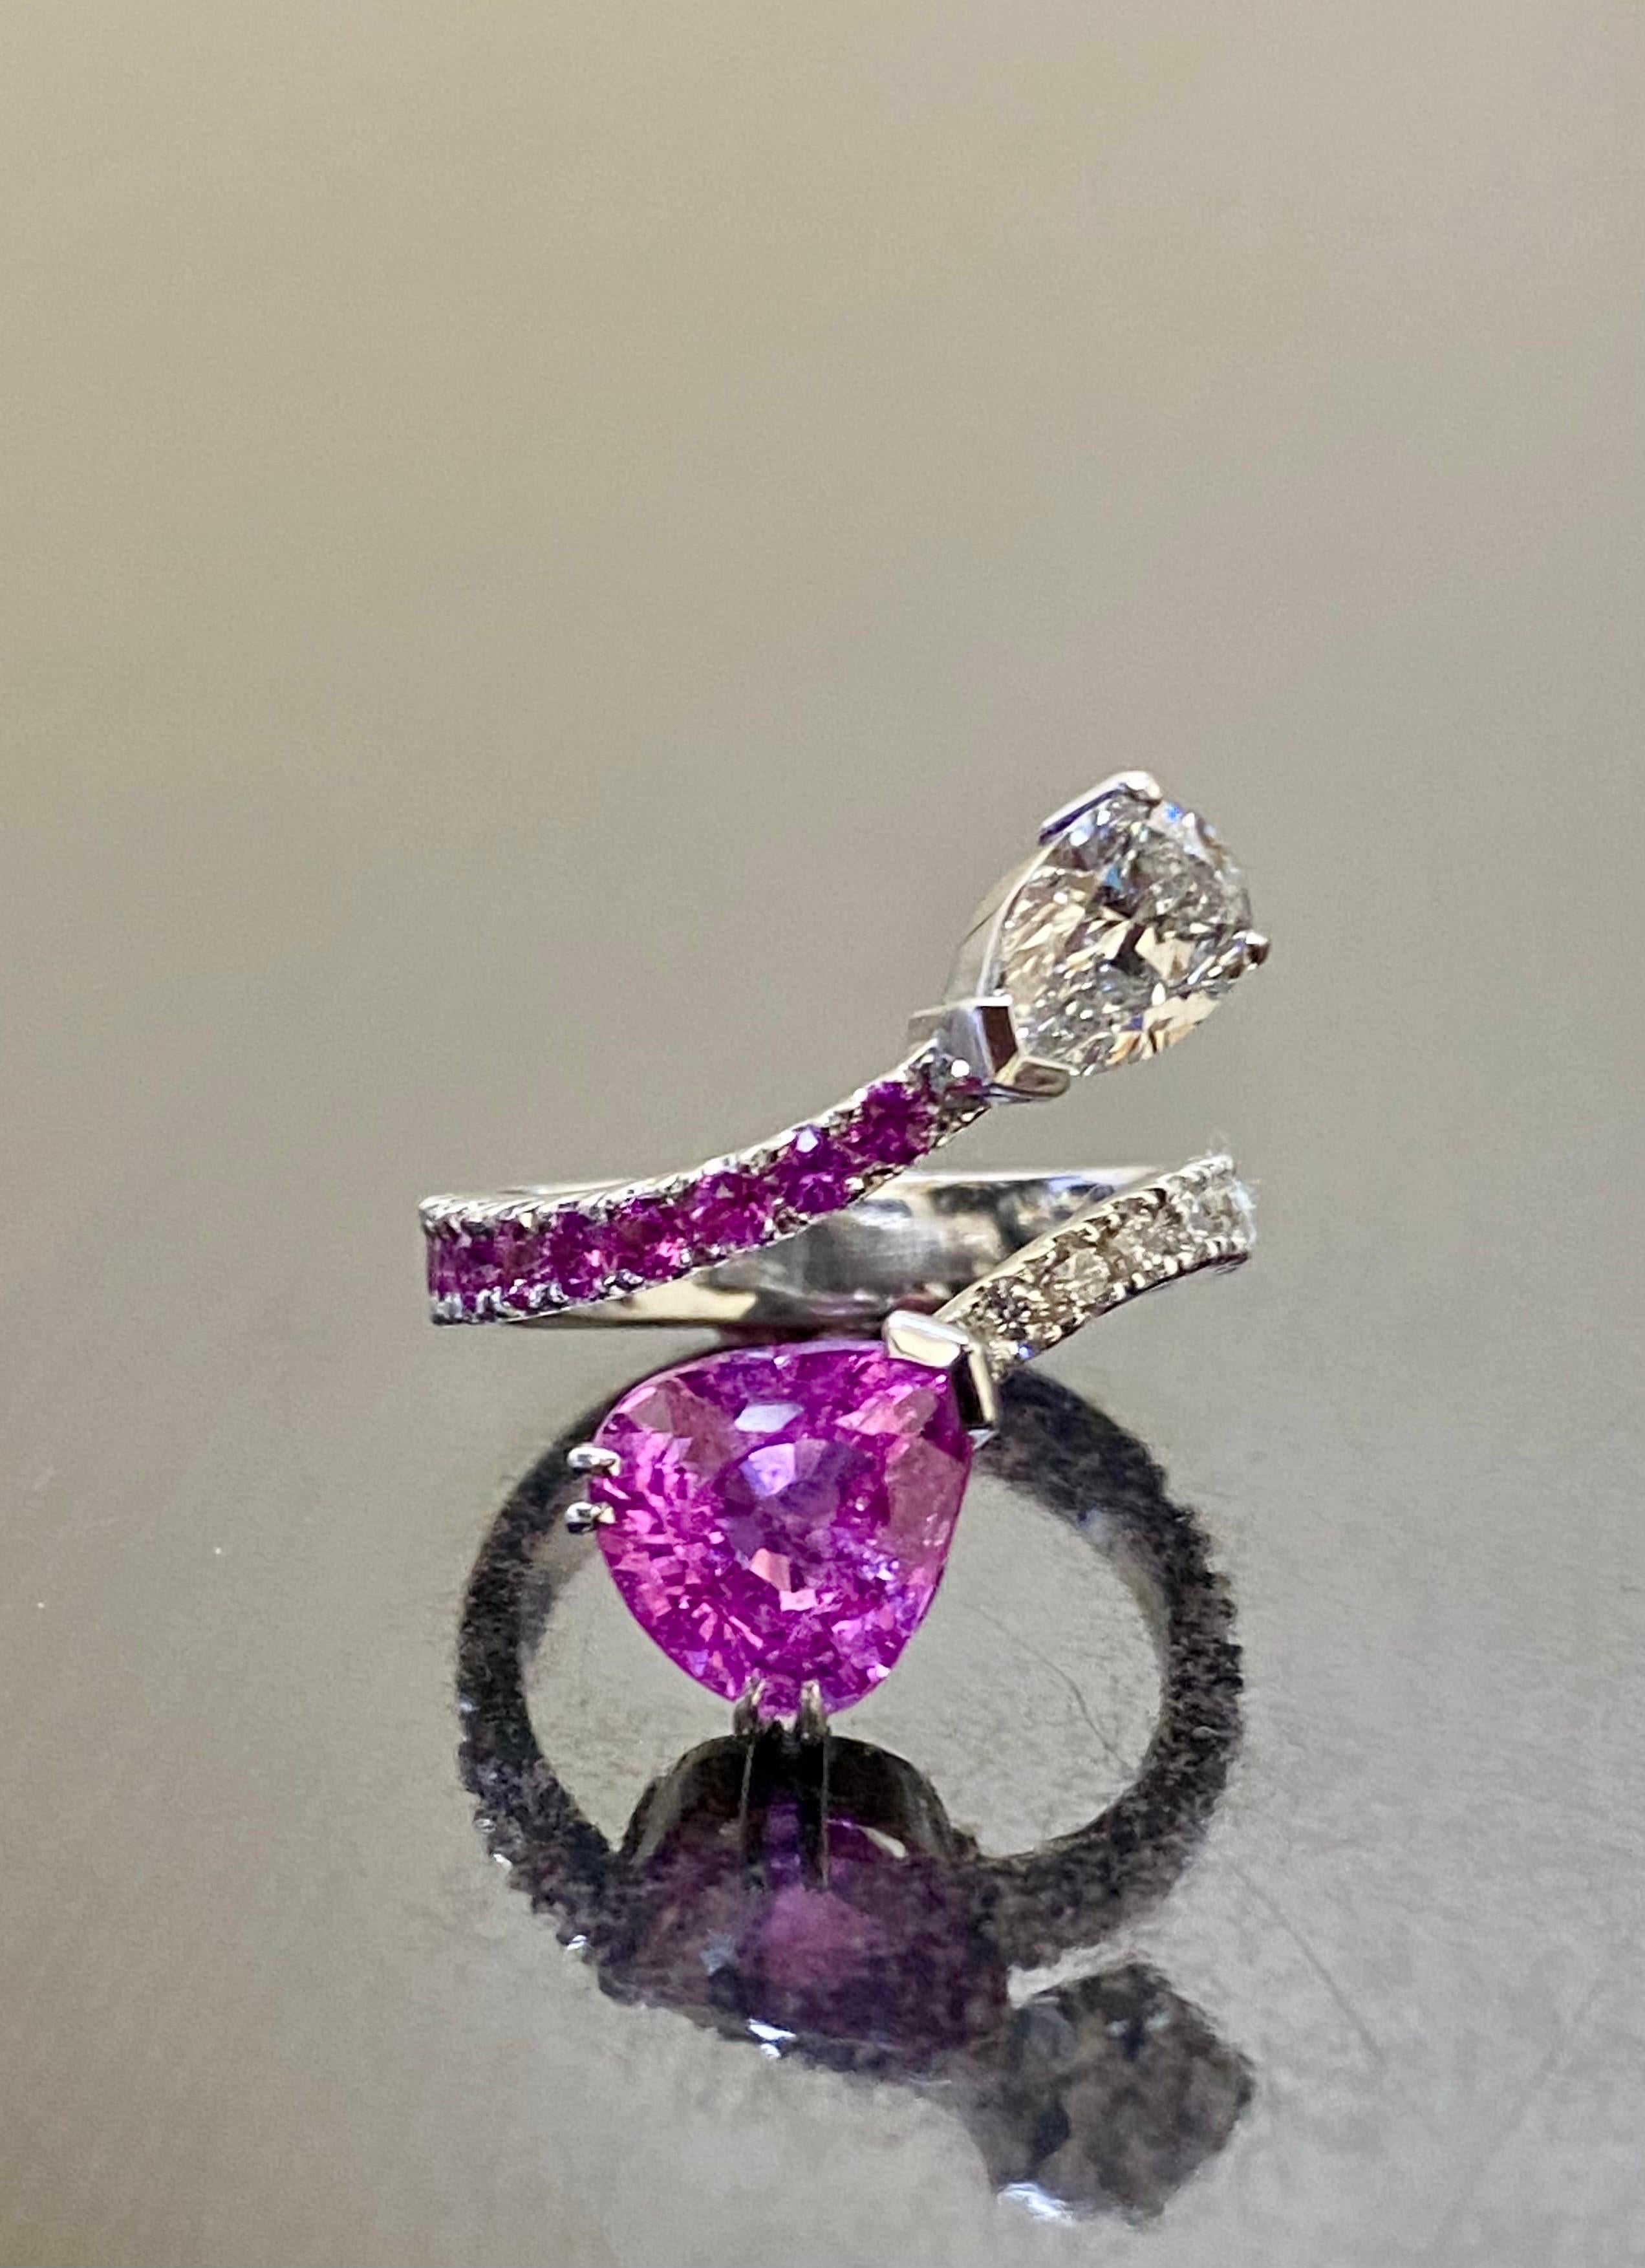 DeKara Designs Collection

Metal- 18K White Gold, .750.

Stones- GIA Certified Pear Shape Purplish Pink Sapphire 3.03 Carats, GIA Certified Pear Shape Diamond H Color I1 Clarity 0.93 Carats. 9 Round Diamonds G Color VS1-VS2 Clarity 0.50 Carats, 9